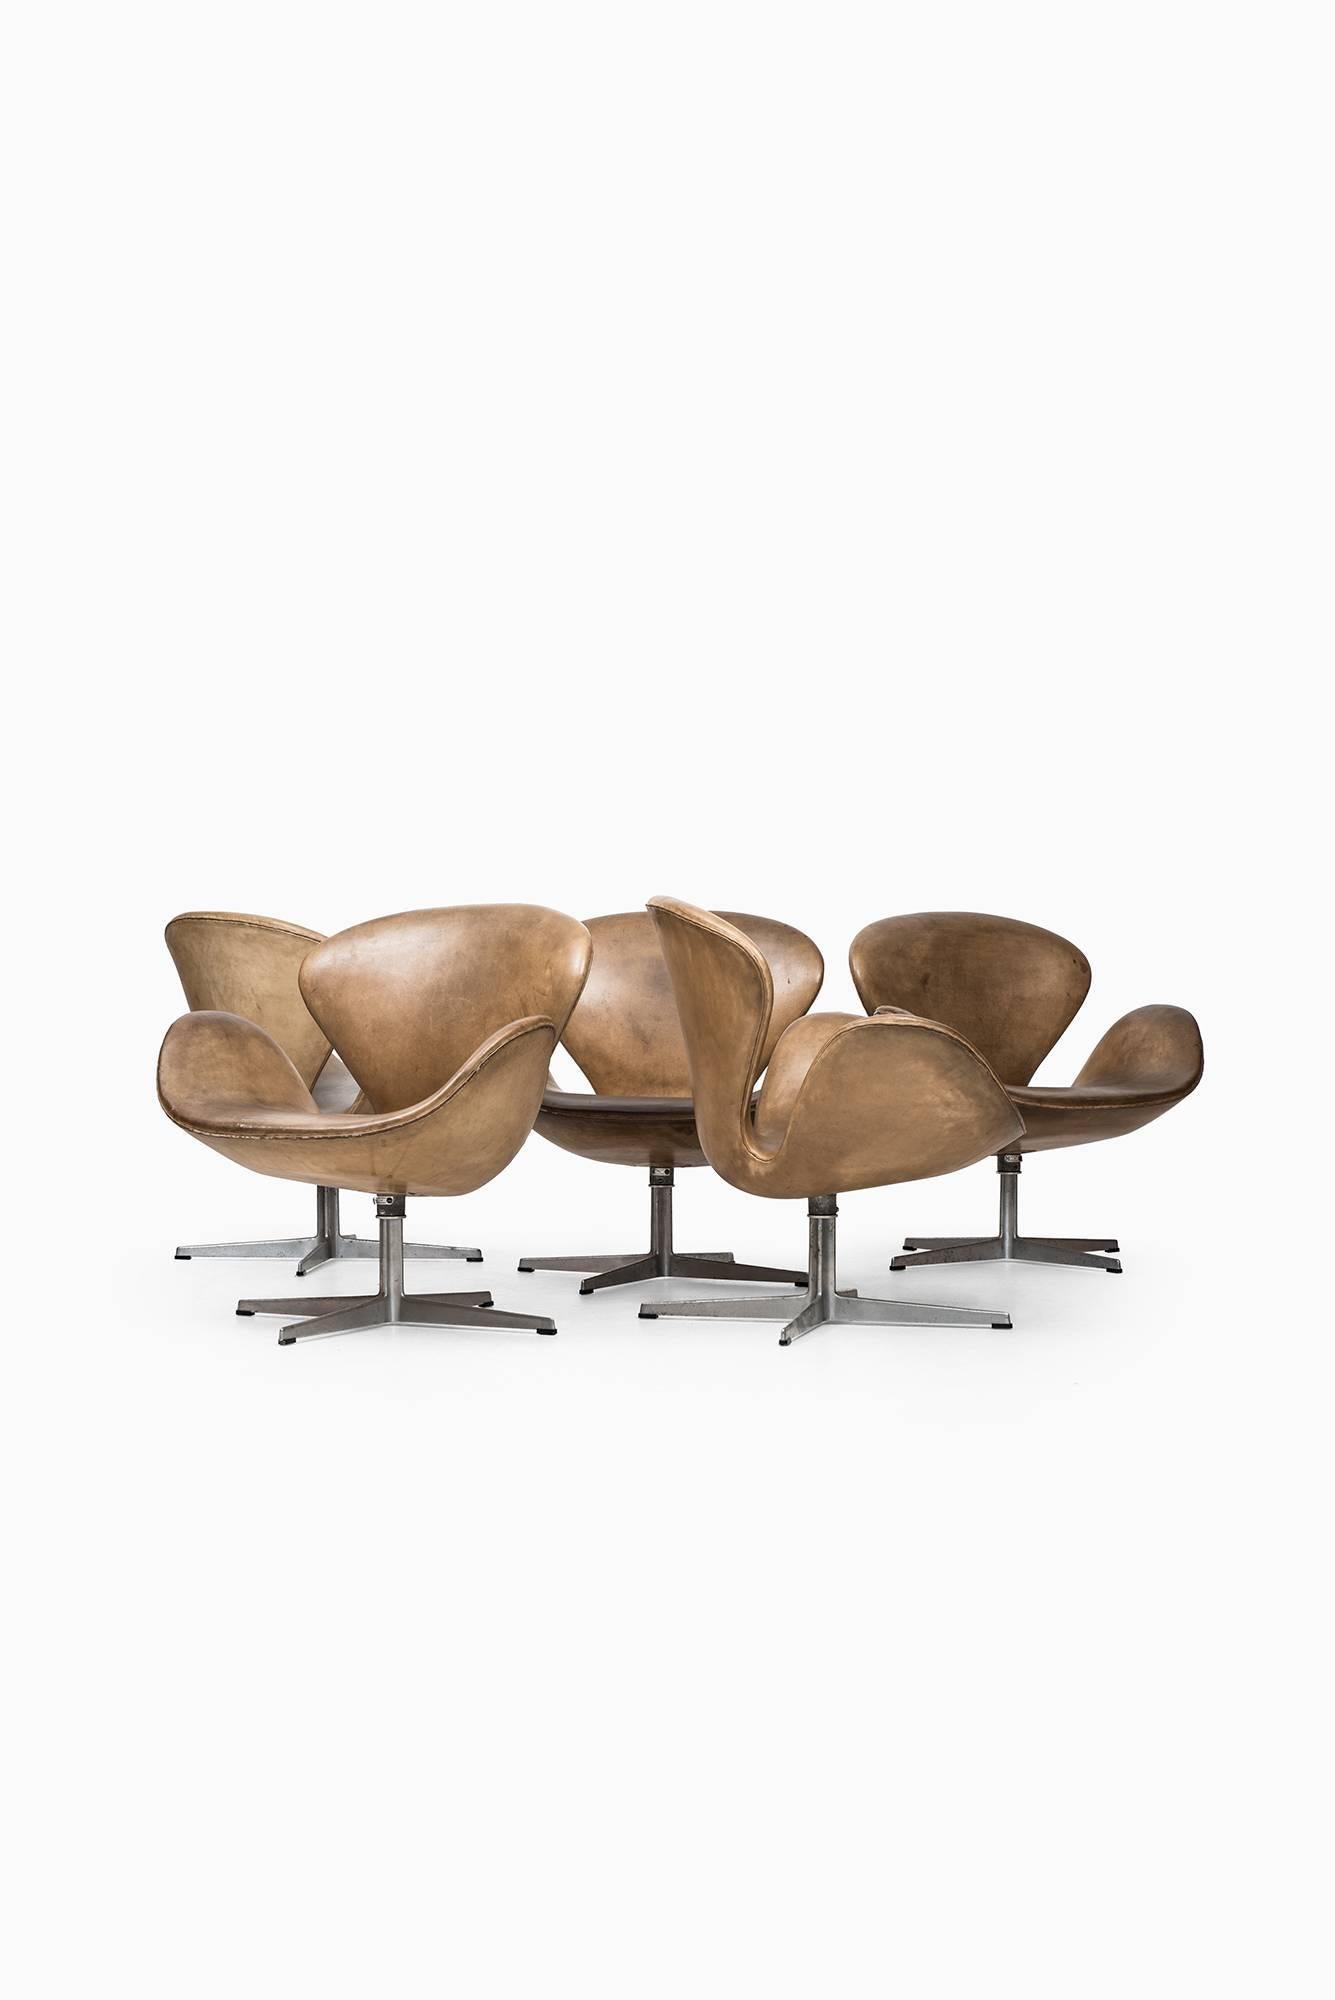 Rare set of five early easy chairs model 3320 / Swan designed by Arne Jacobsen. Produced by Fritz Hansen in Denmark.